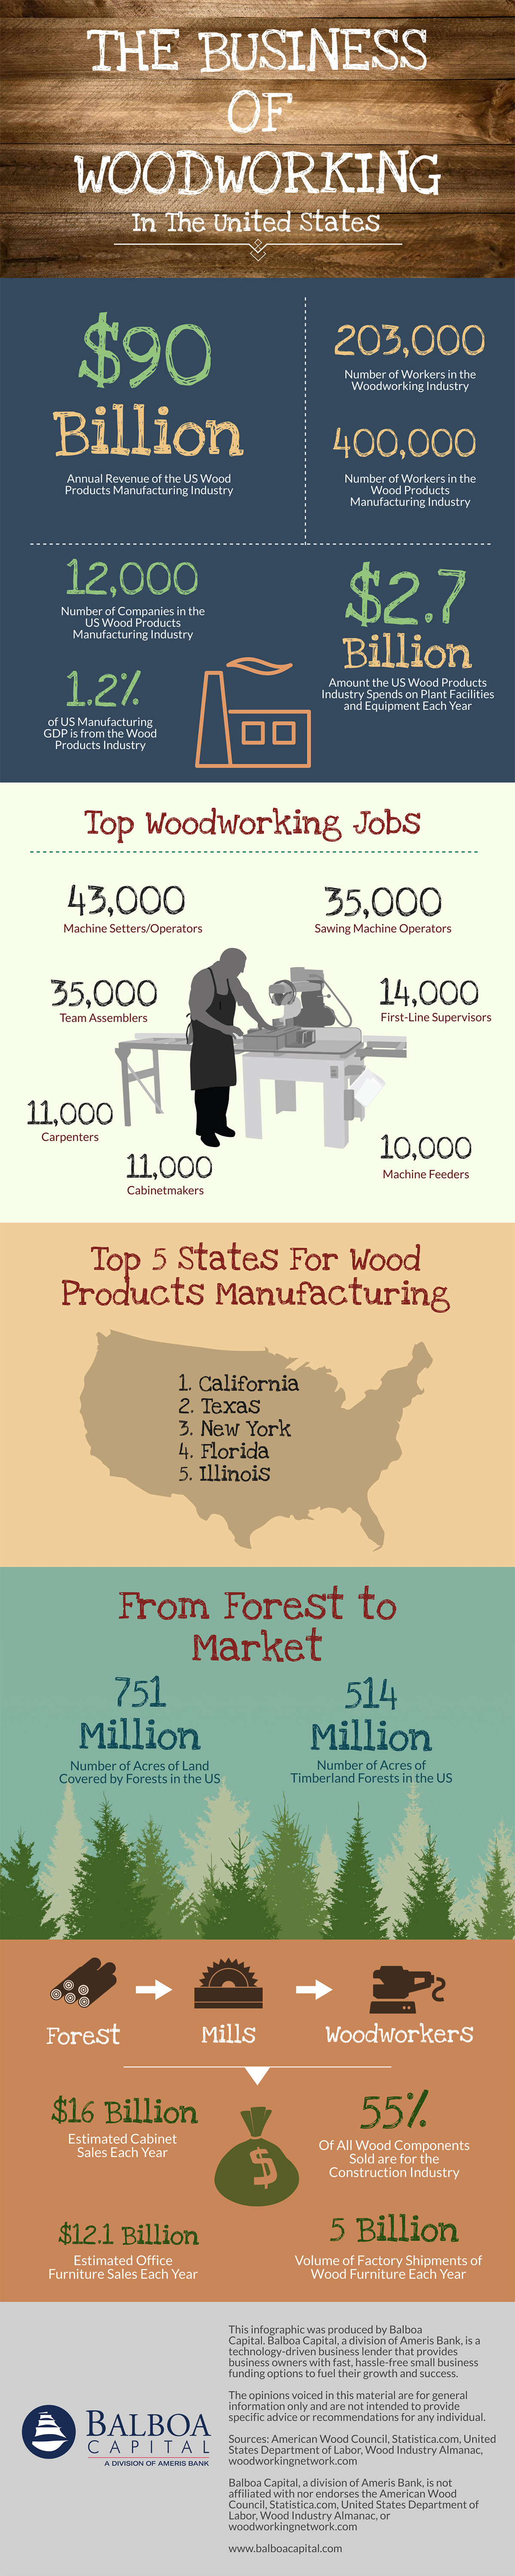 Woodworking Industry Infographic